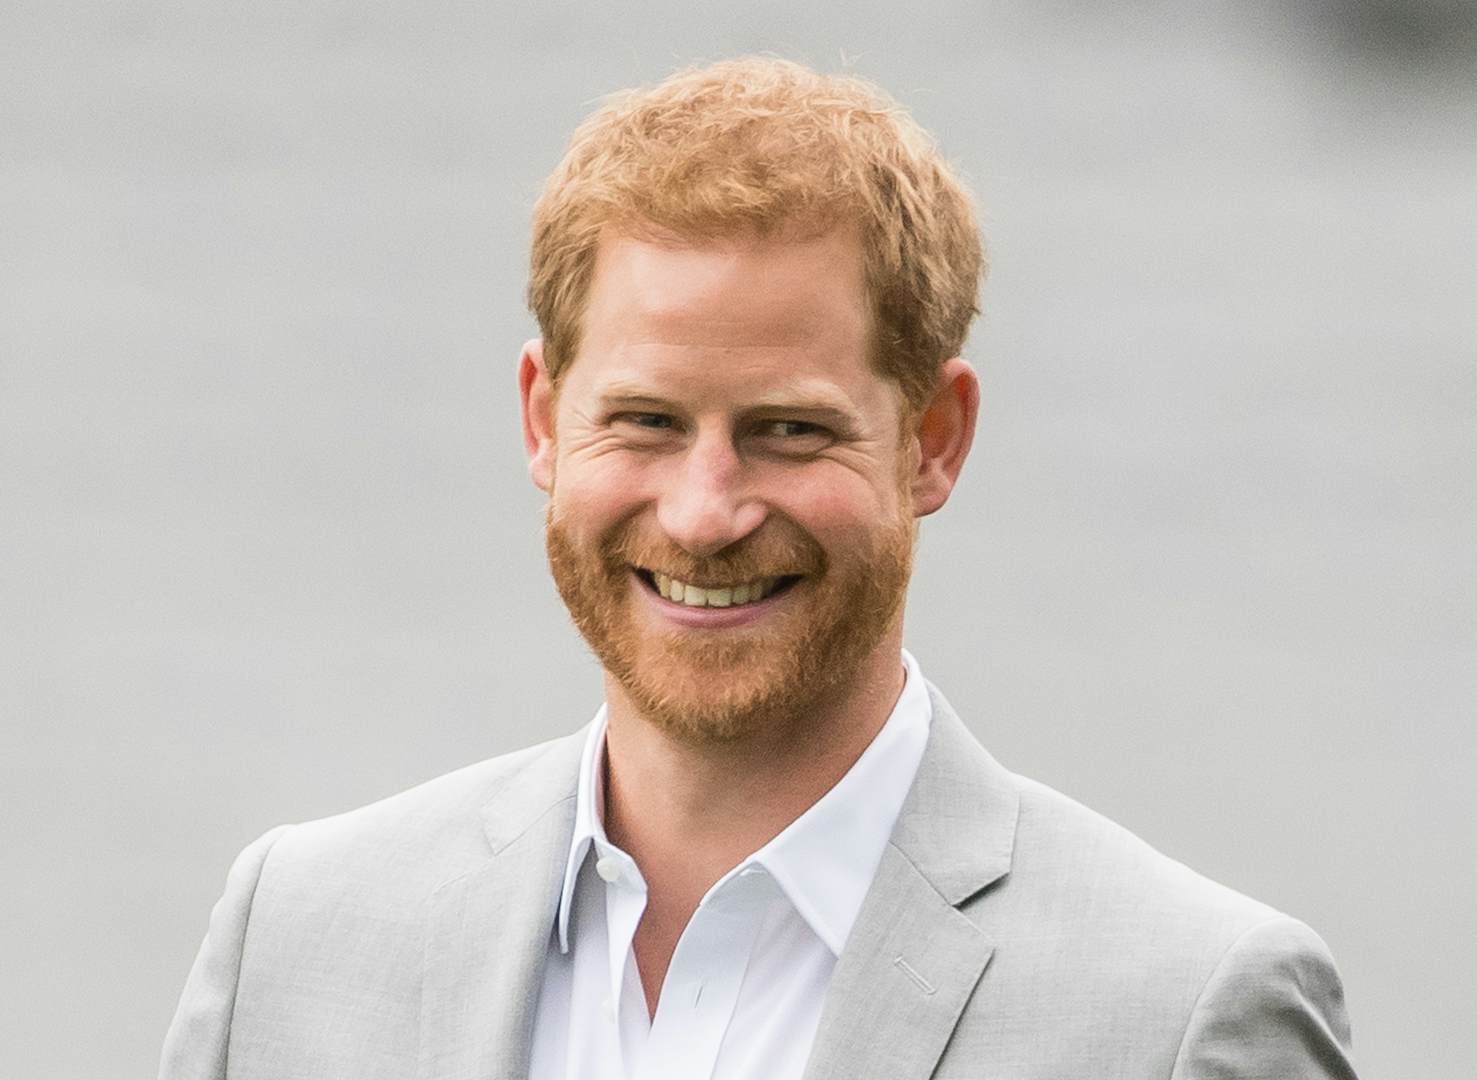 Prince Harry launches eco-travel scheme inspired by Maori practices